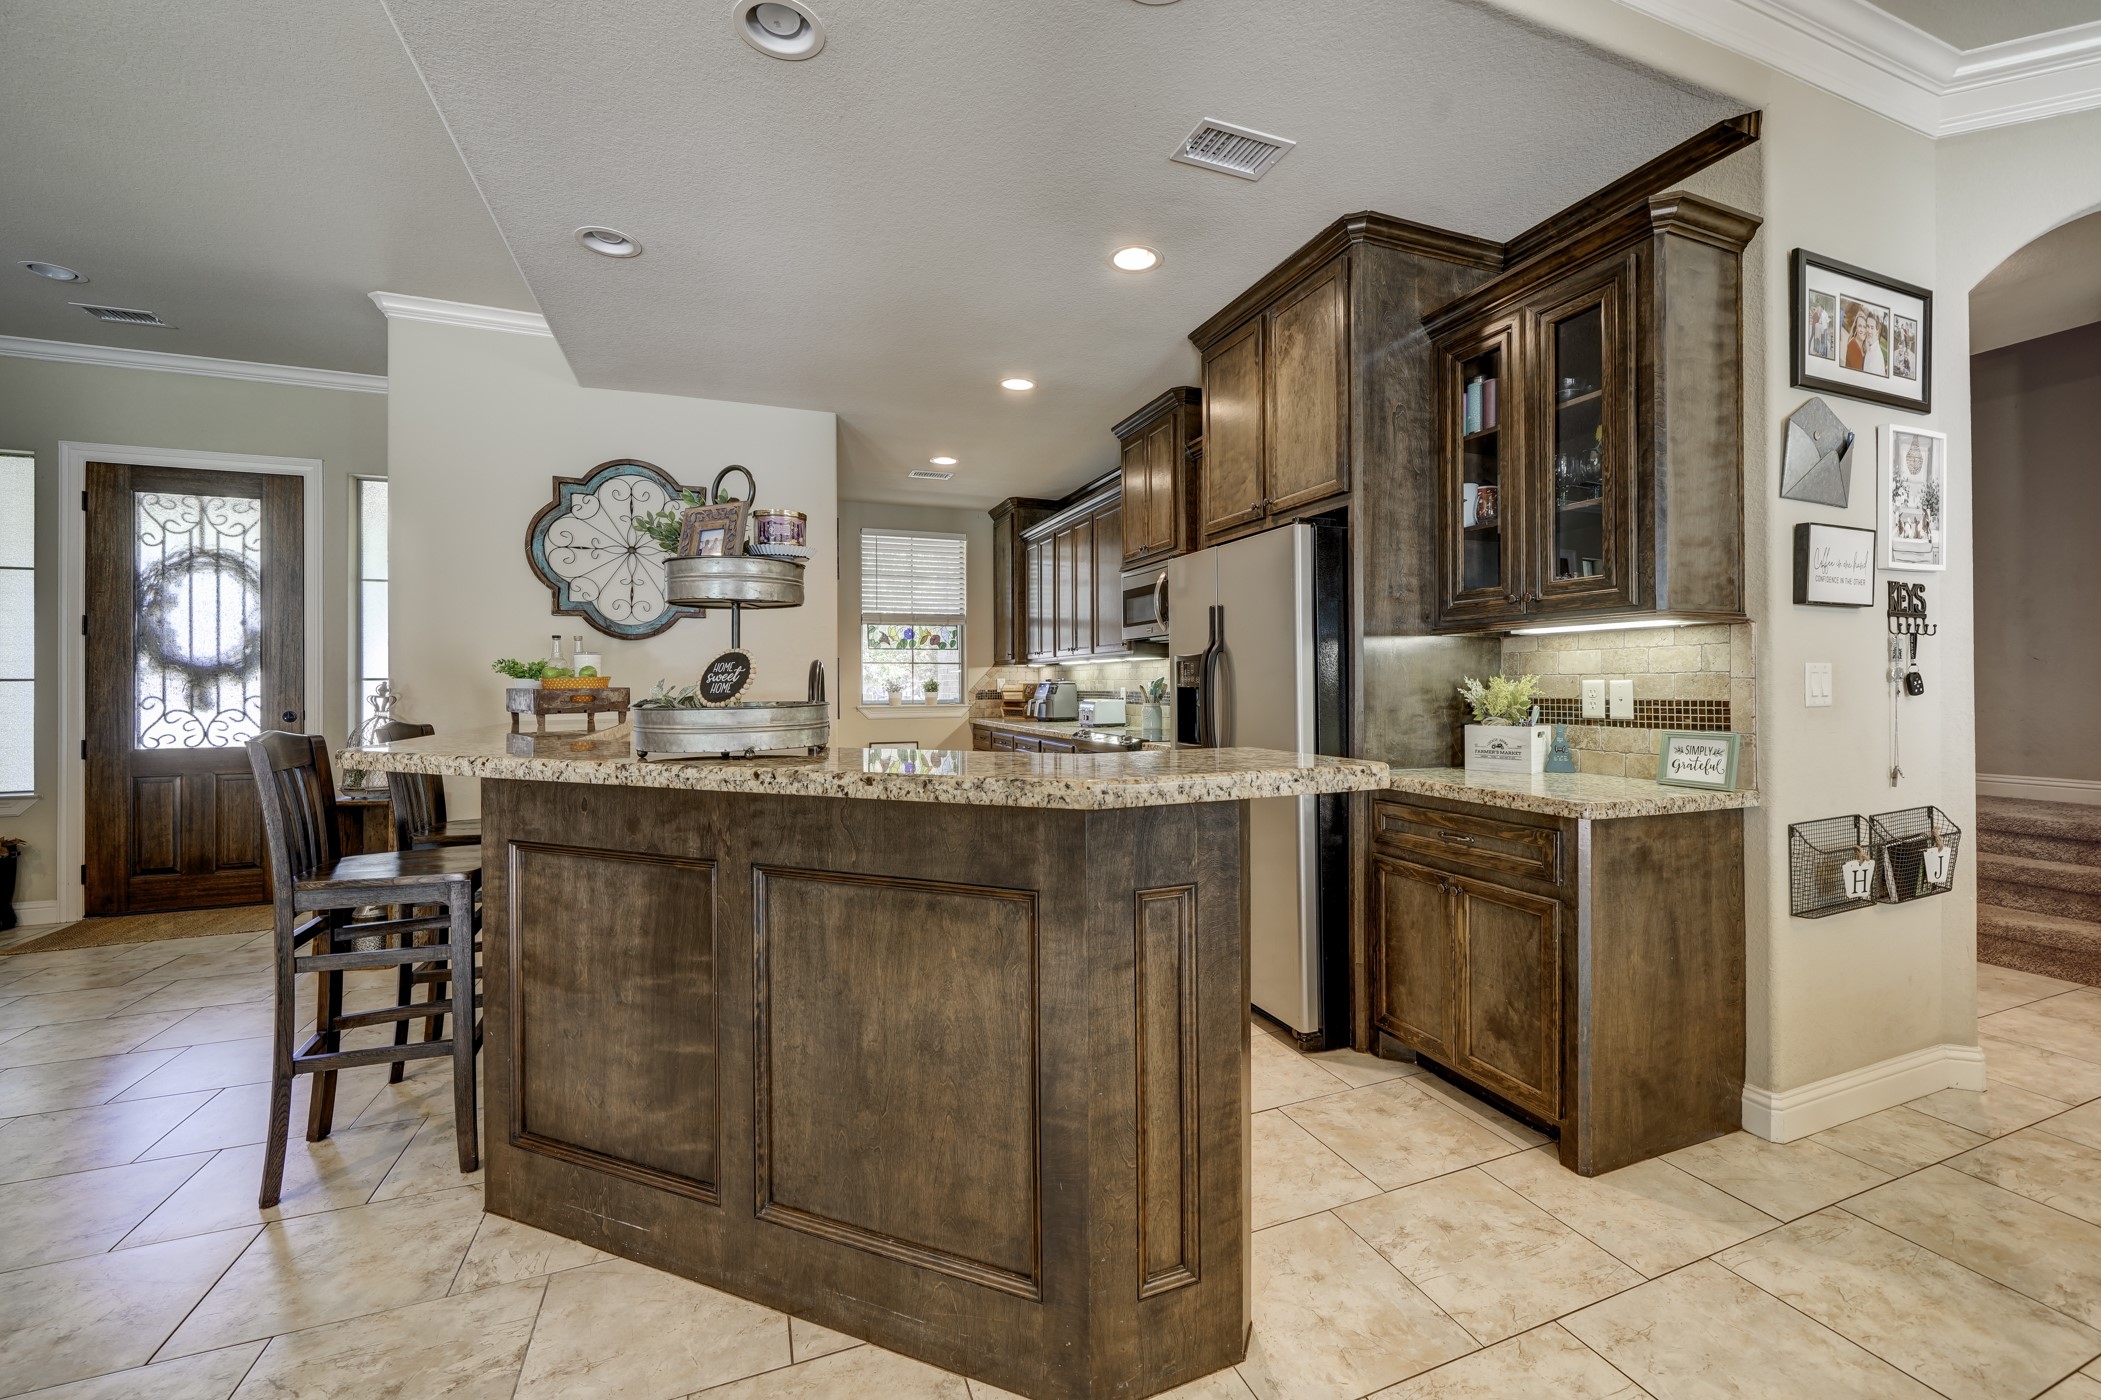 Step inside to find tile floors that run continuously throughout the main gathering areas on the first floor. A beautiful kitchen offers granite countertops and custom-made cabinets!